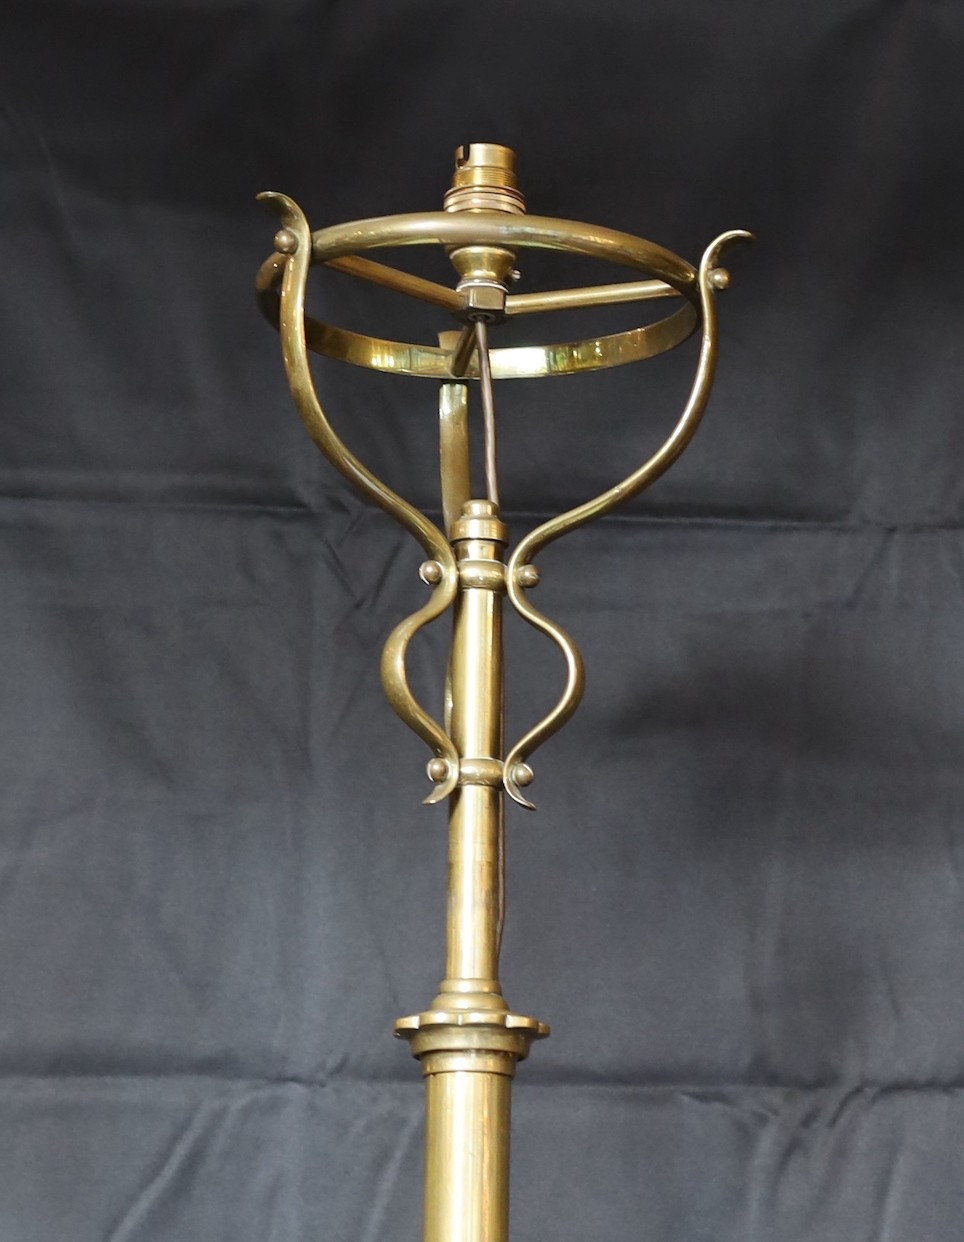 A late 19th century English telescopic lamp standard of Art Nouveau influence, converted from oil to electricity, heigh 149cm. width of base 49cm.